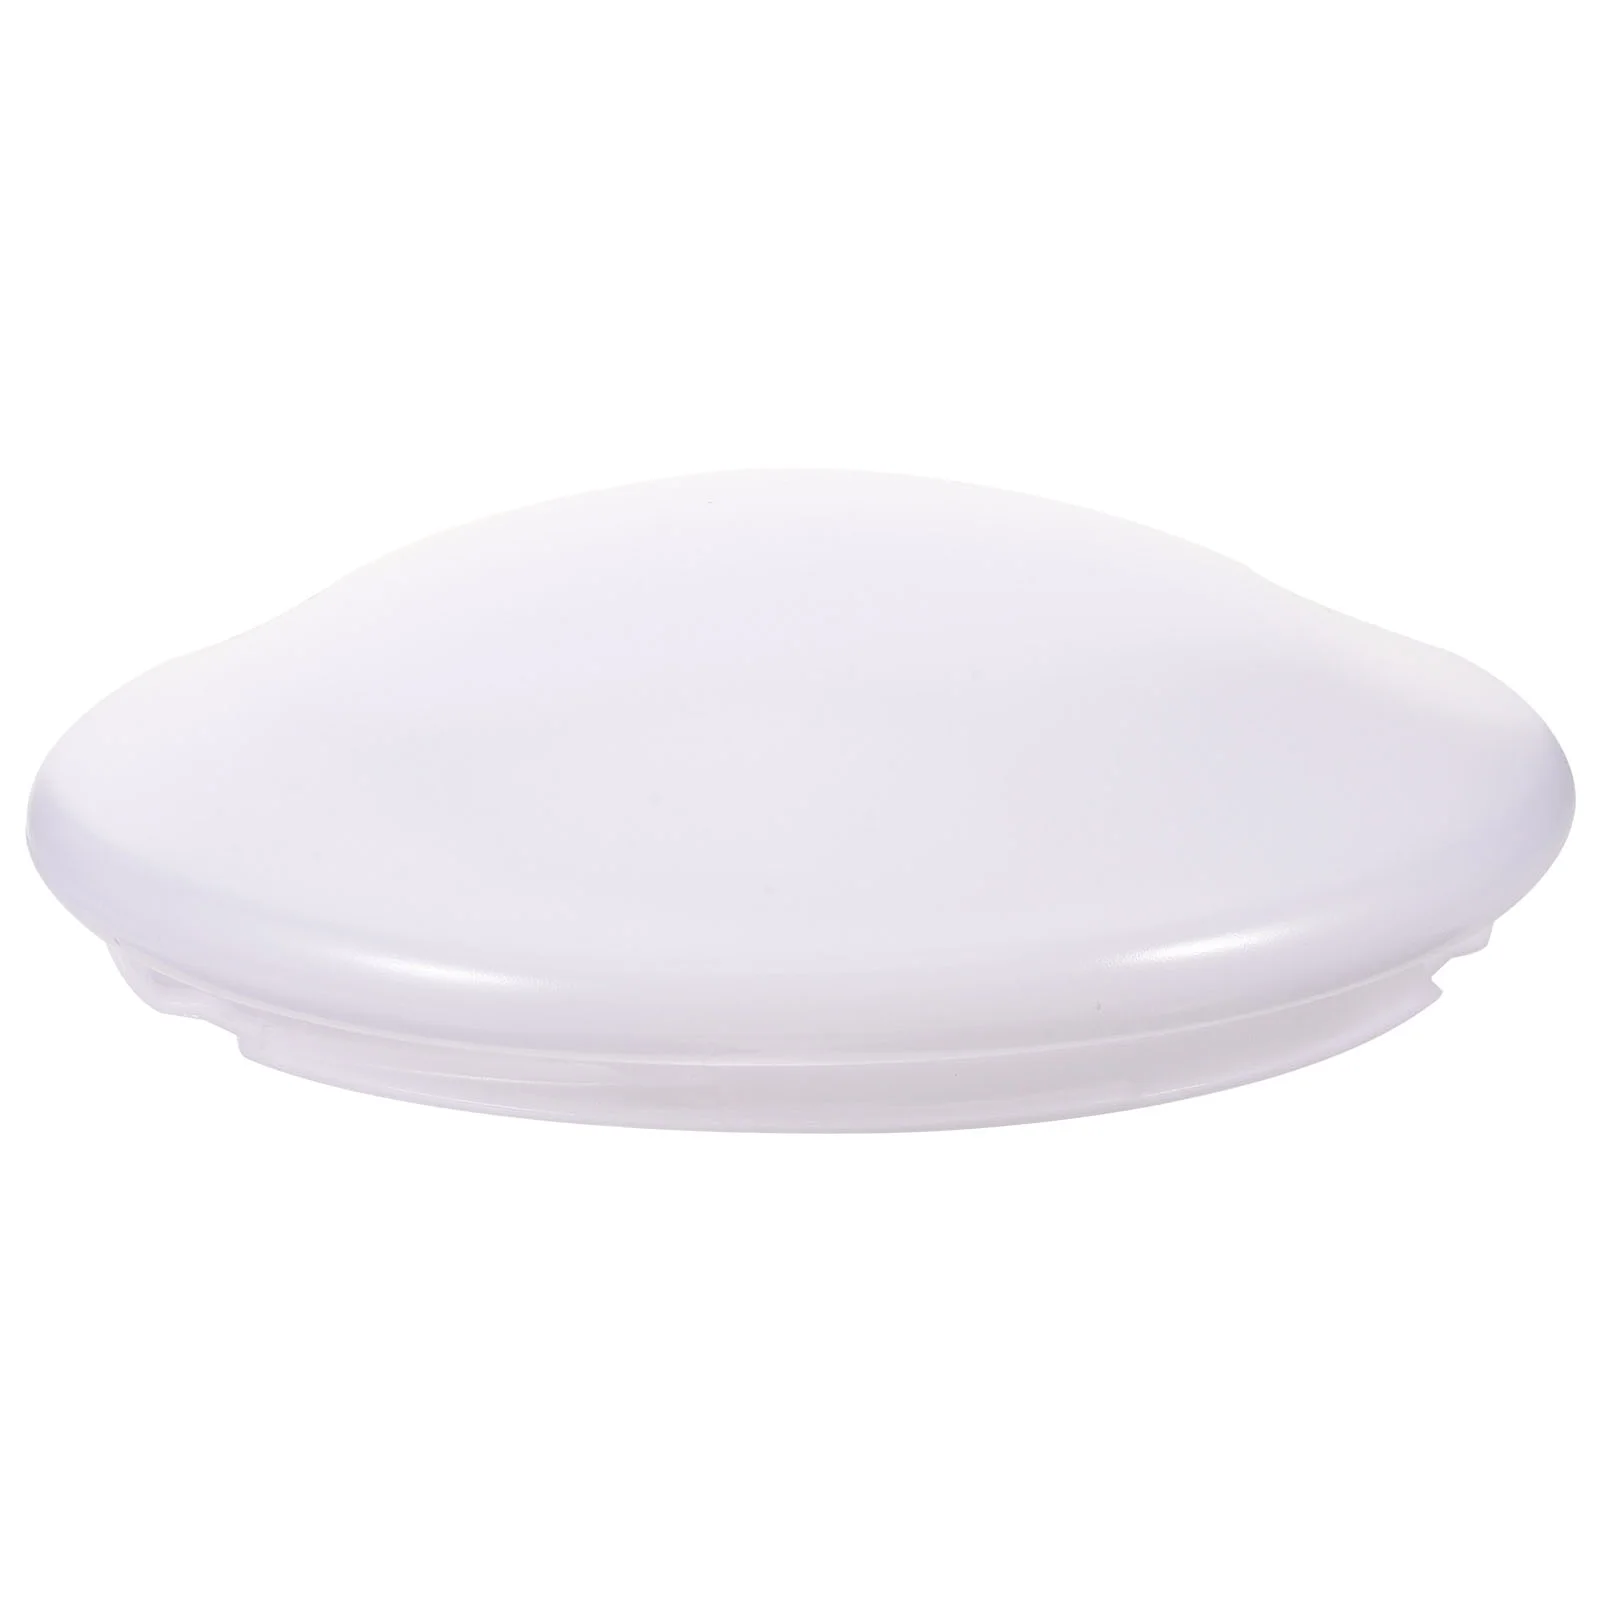 Ceiling Light Shade Plastic Ceiling Plate Cover White Opal Mushroom Glass Shade Ceiling Fixture Hanging Ceiling Lights Shade салатник golden opal white купол 12 см